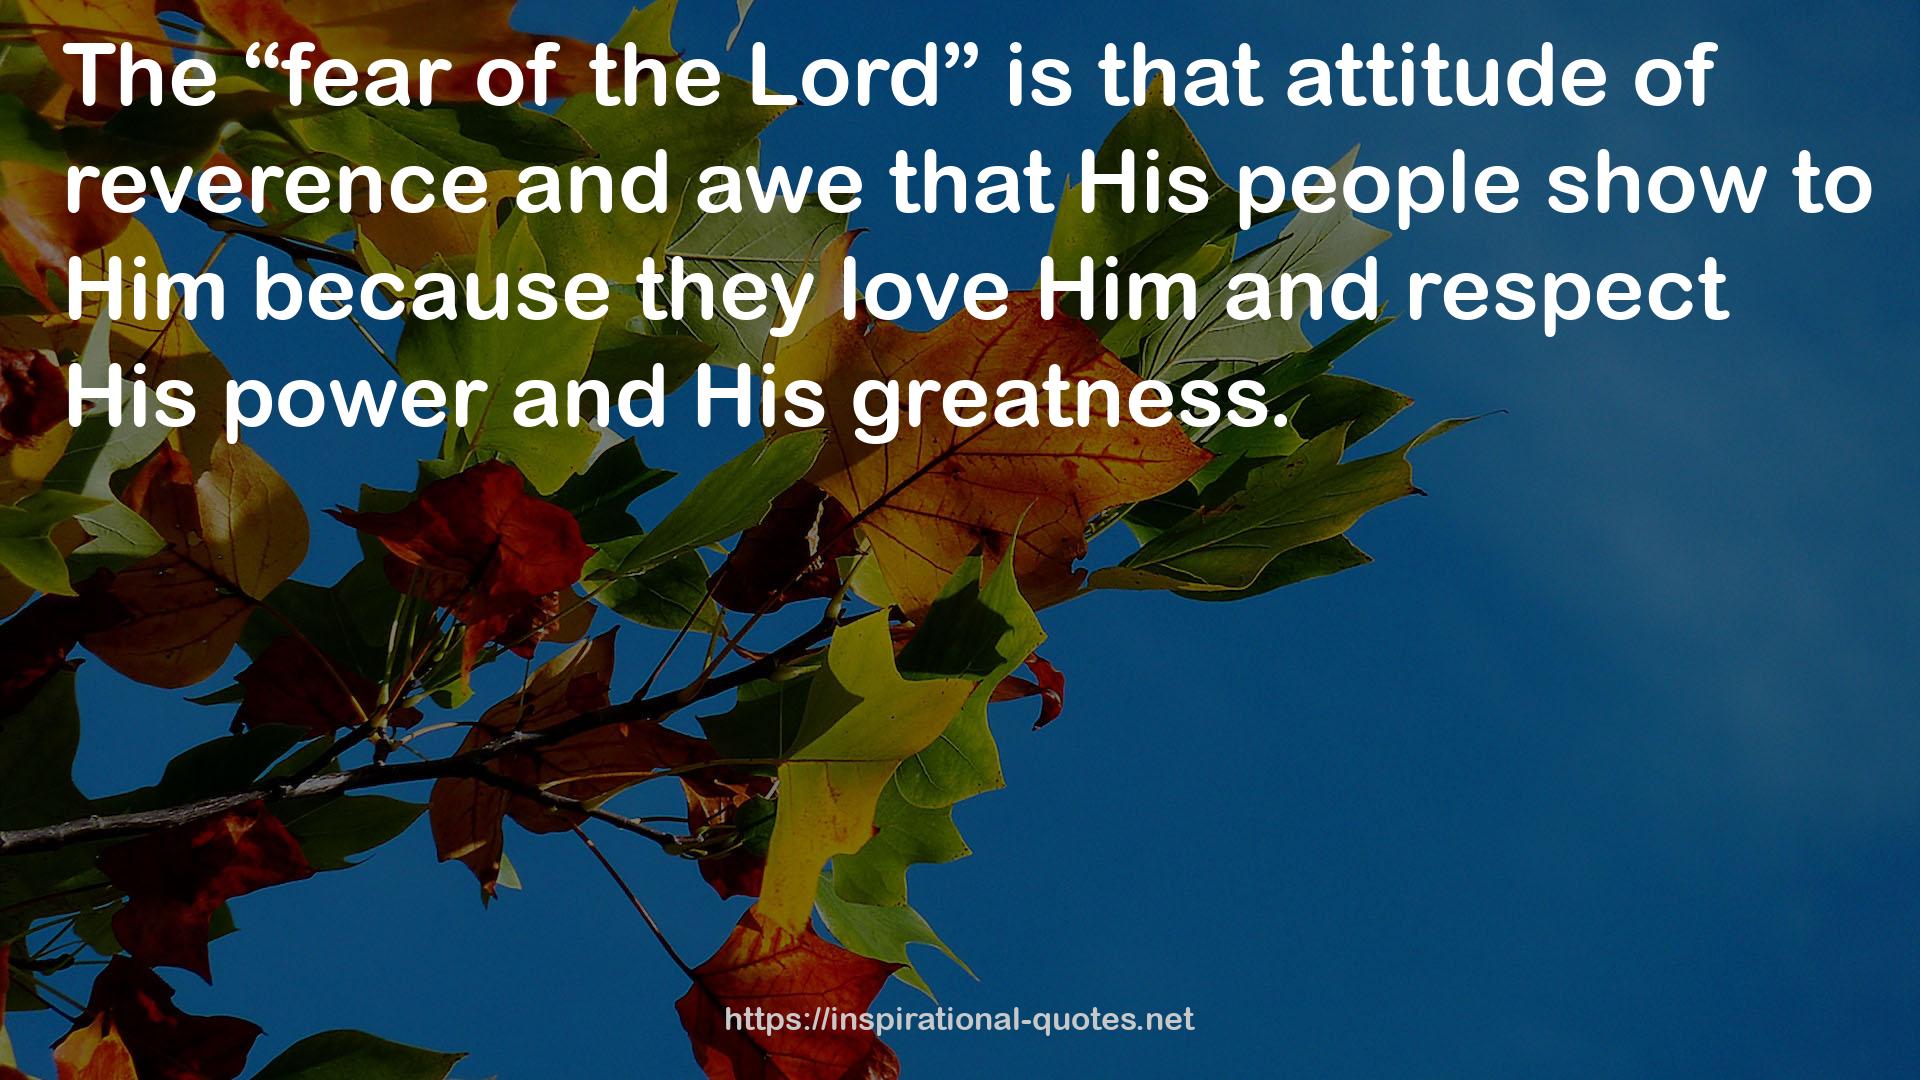 The “fear of the Lord” is that attitude of reverence and awe that His people show to Him because they love Him and respect His power and His greatness.